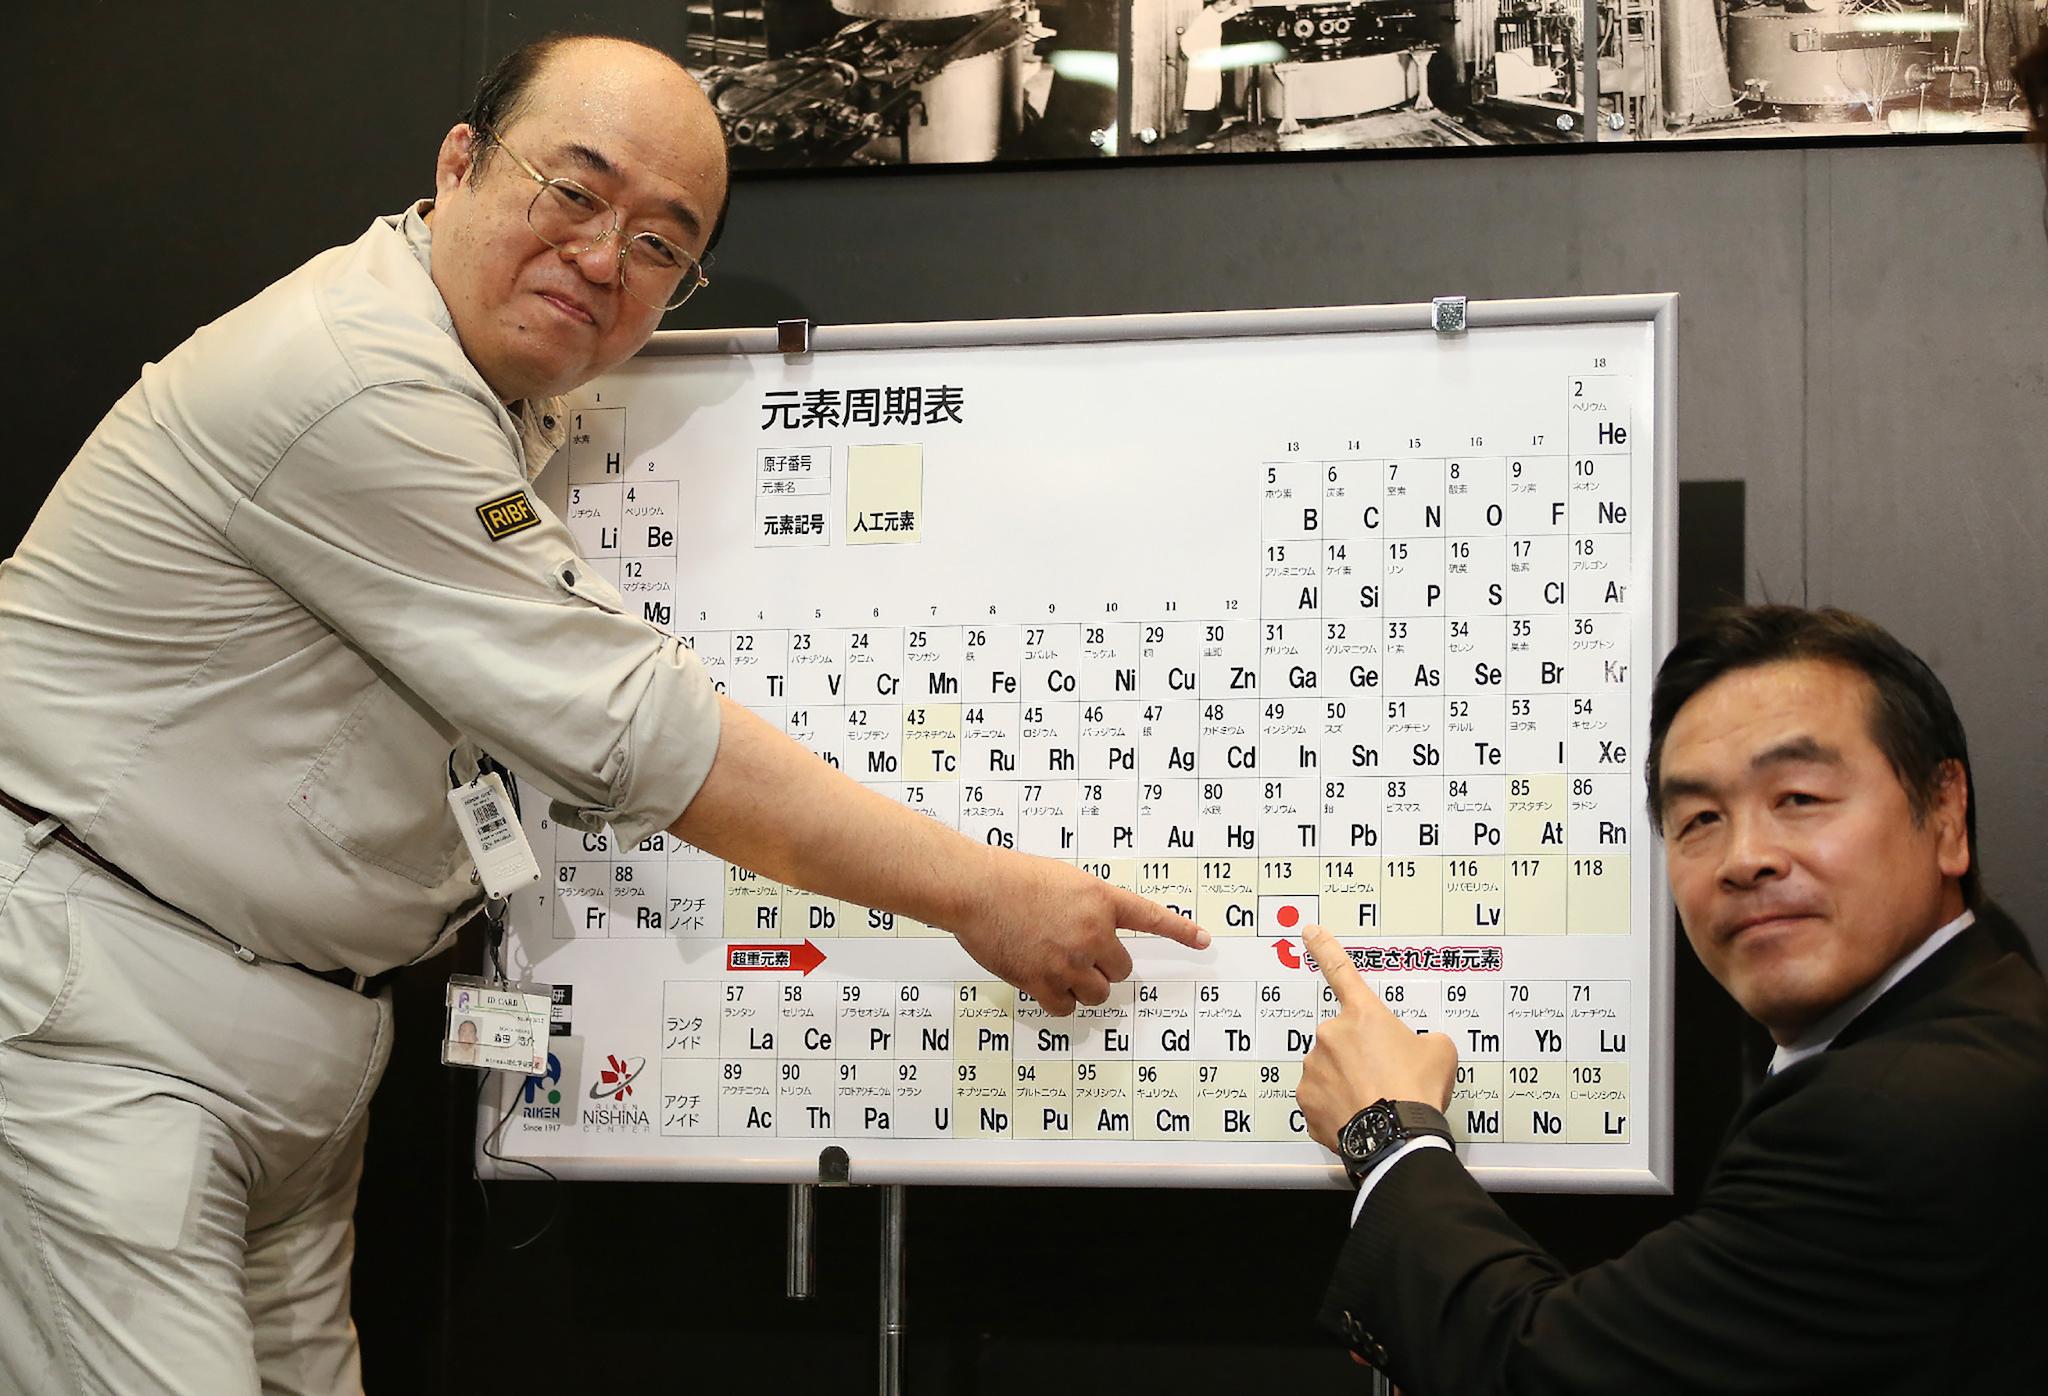 Kosuke Morita (L), who led the team at Riken institute that discovered the superheavy synthetic element, and Hiroshi Hase (R), Minister of Education, Culture, Sports, Science and Technology, pose with a board displaying the new element 113 during at a press conference at Riken's research center in Wako, Saitama prefecture on June 9, 2016